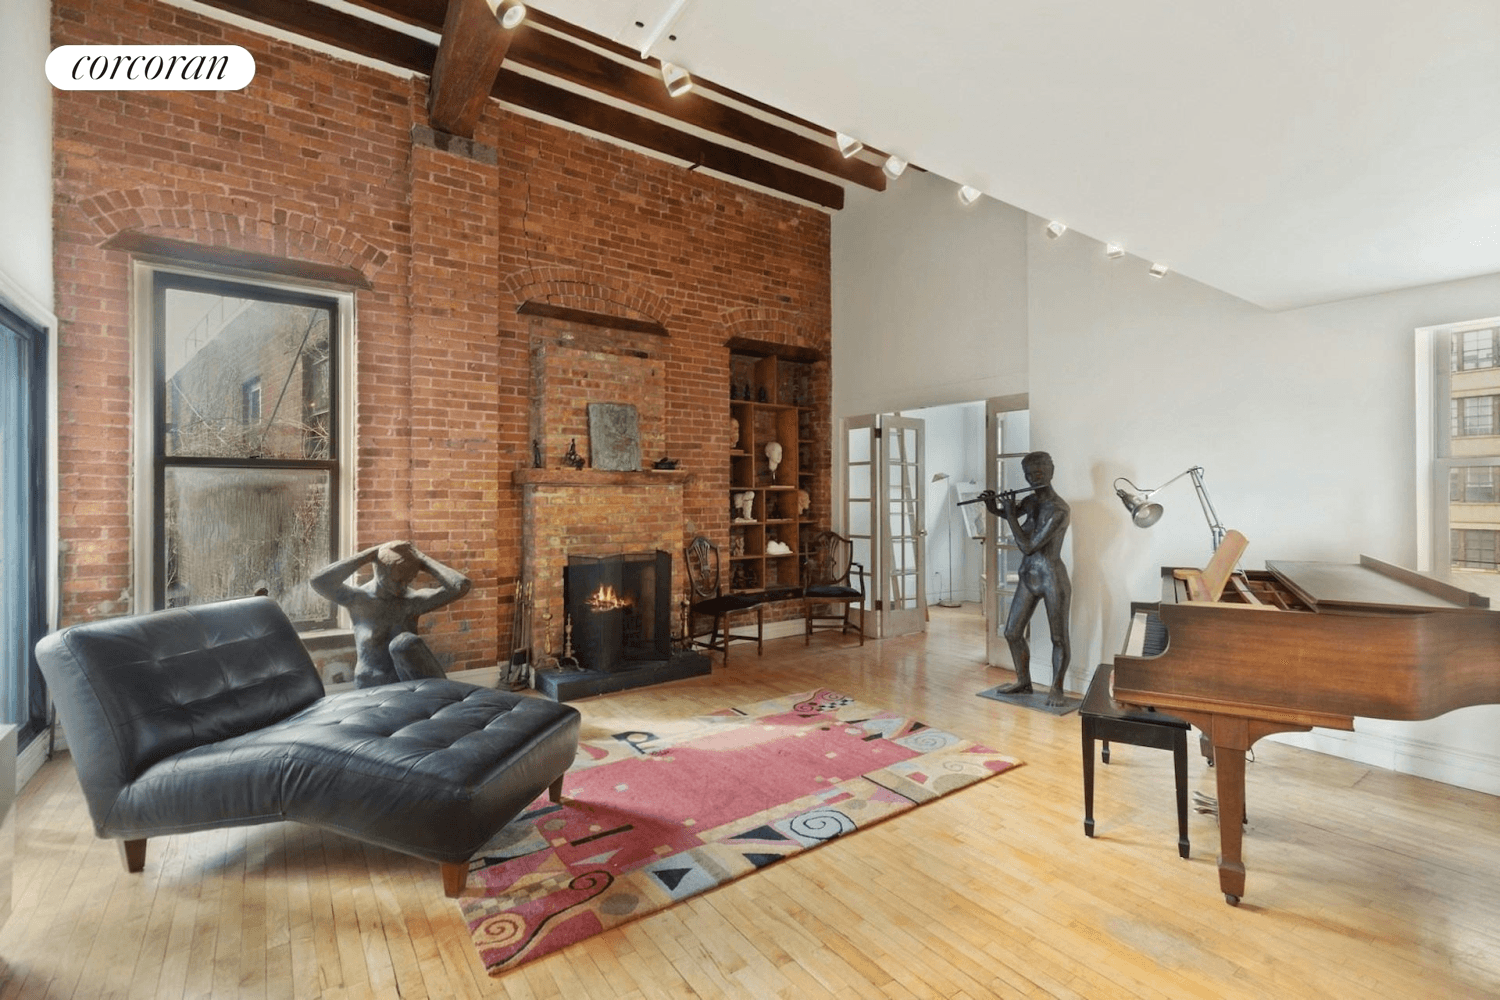 West Village Atelier, with two bedrooms plus den, two bathrooms and two outdoor spaces.